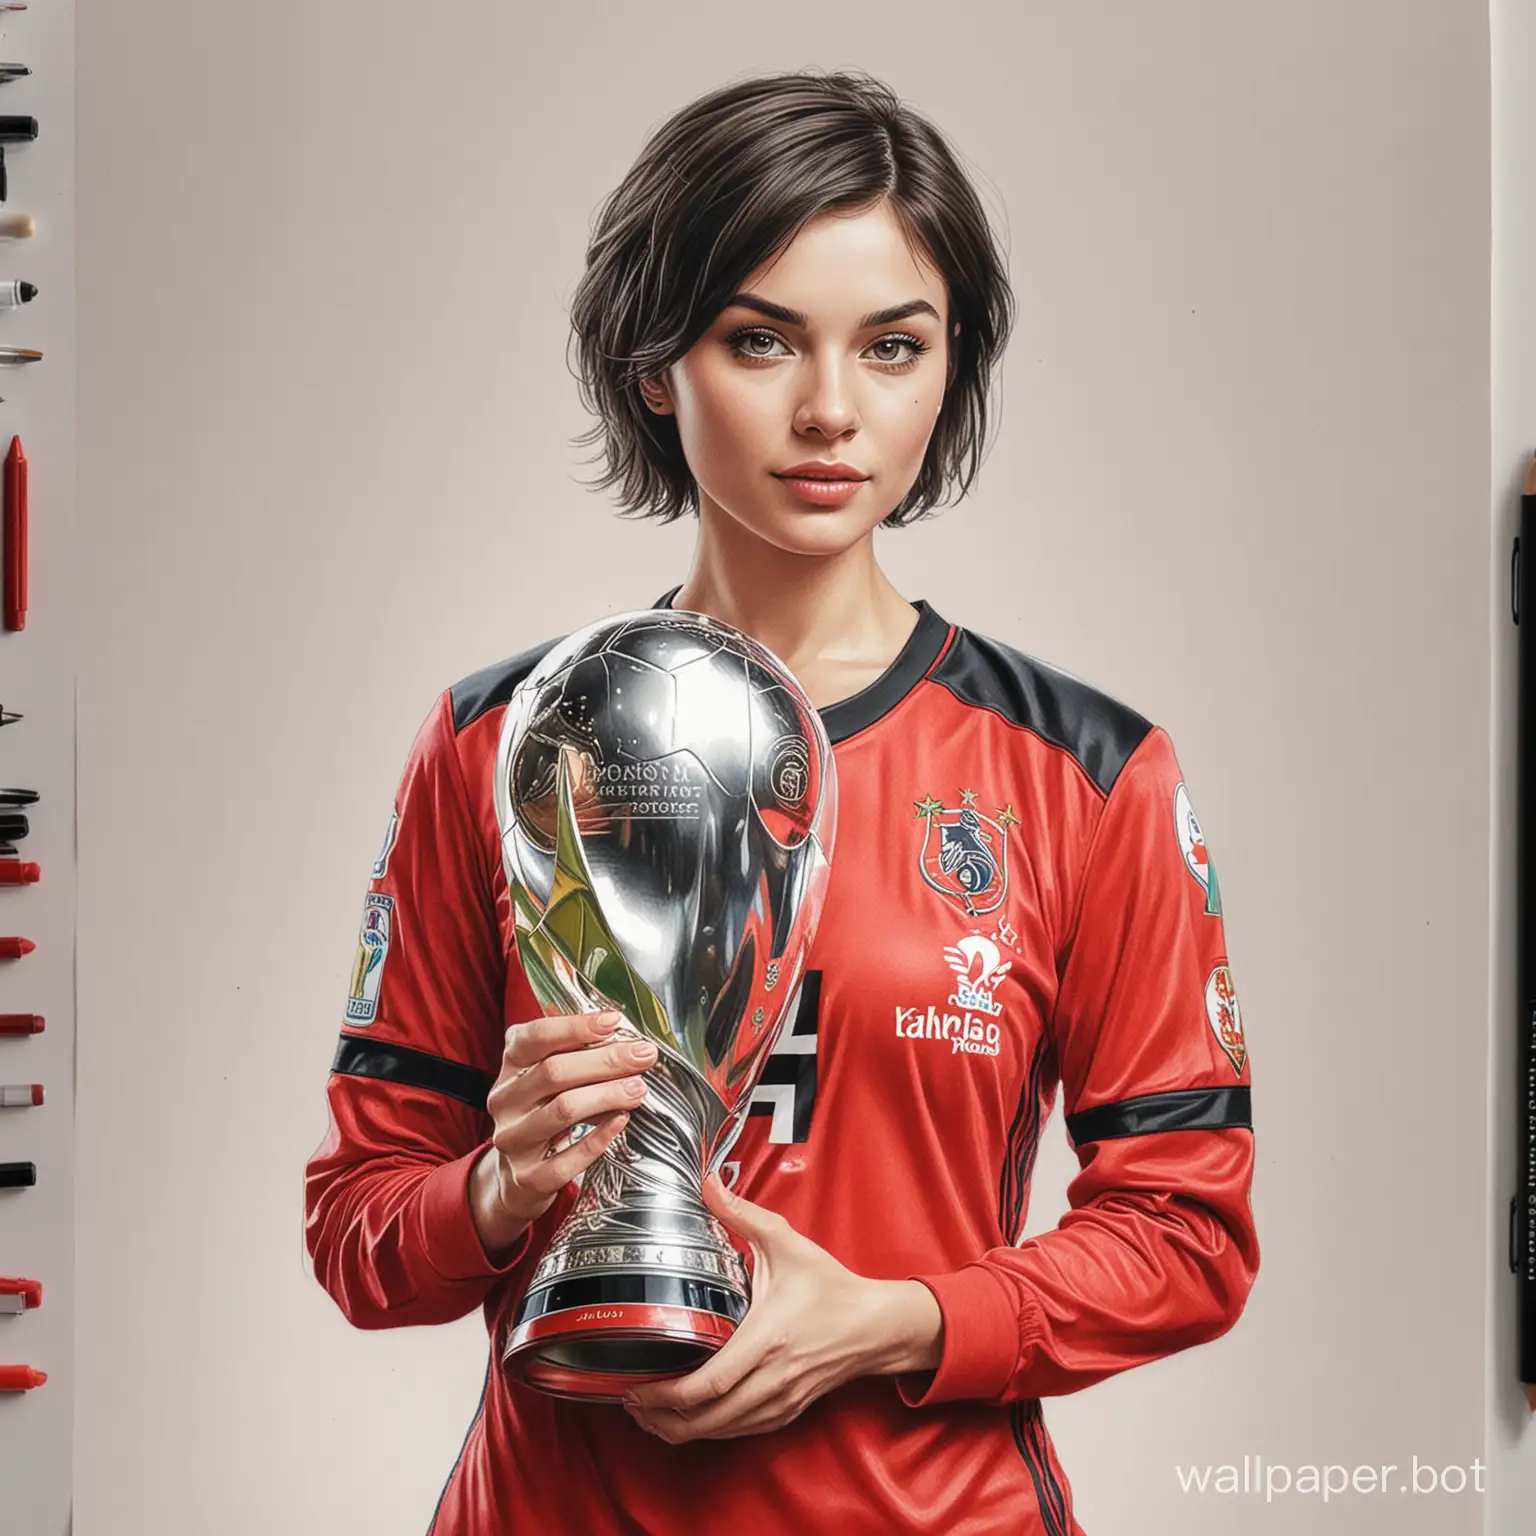 Realistic-Drawing-of-Alina-Lanina-Celebrating-Champions-League-Victory-in-Red-and-Black-Football-Uniform